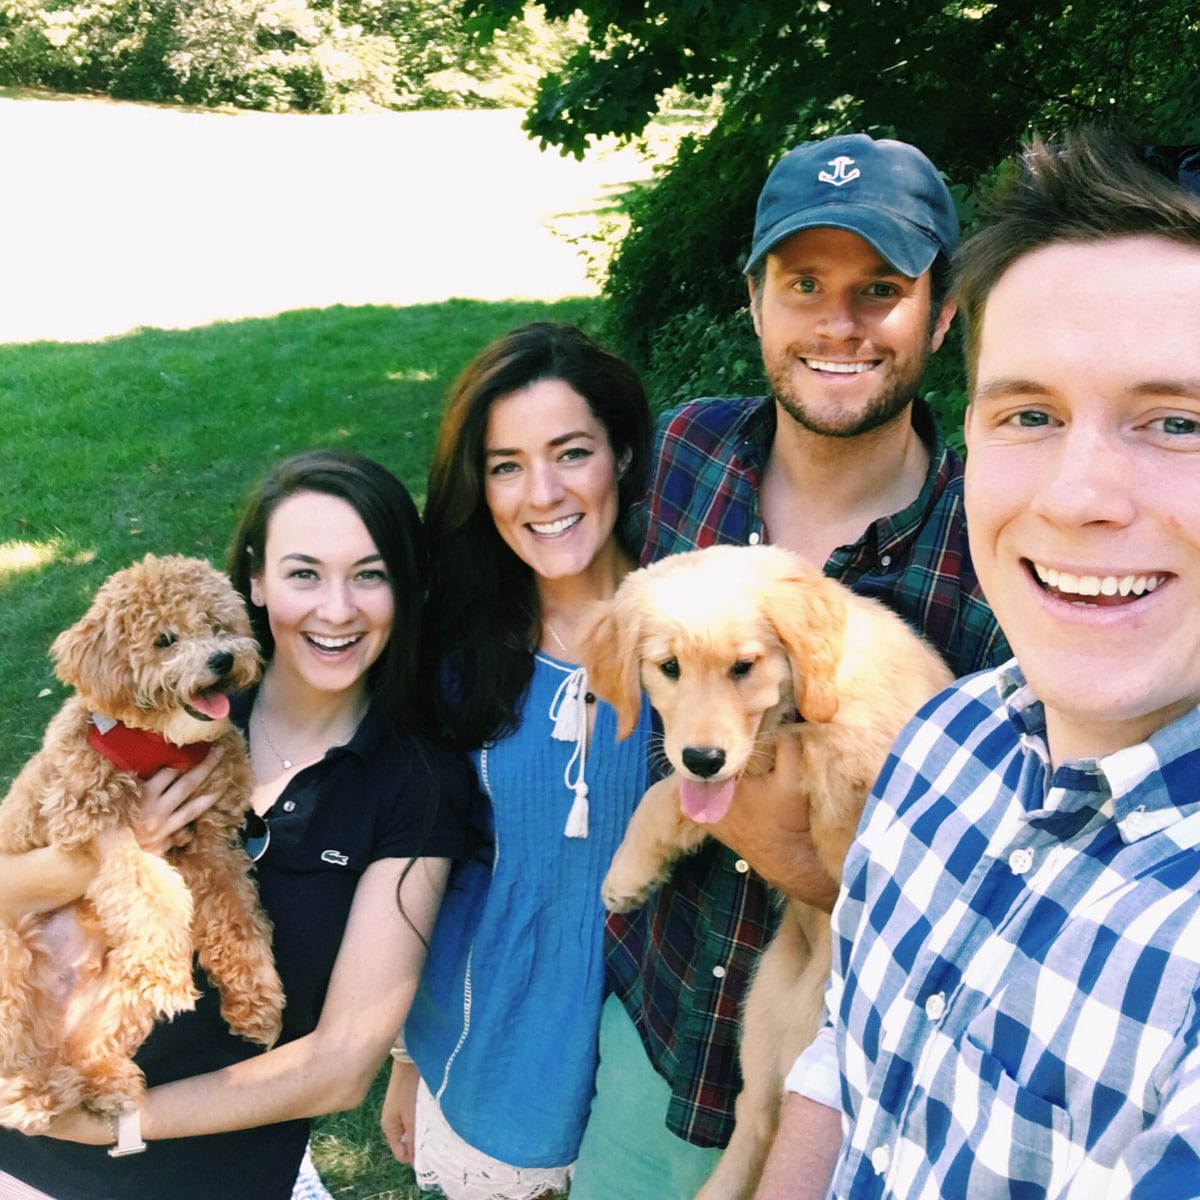 Kiel James Patrick and his wife Sarah Vickers with their golden retriever puppy Bennie.